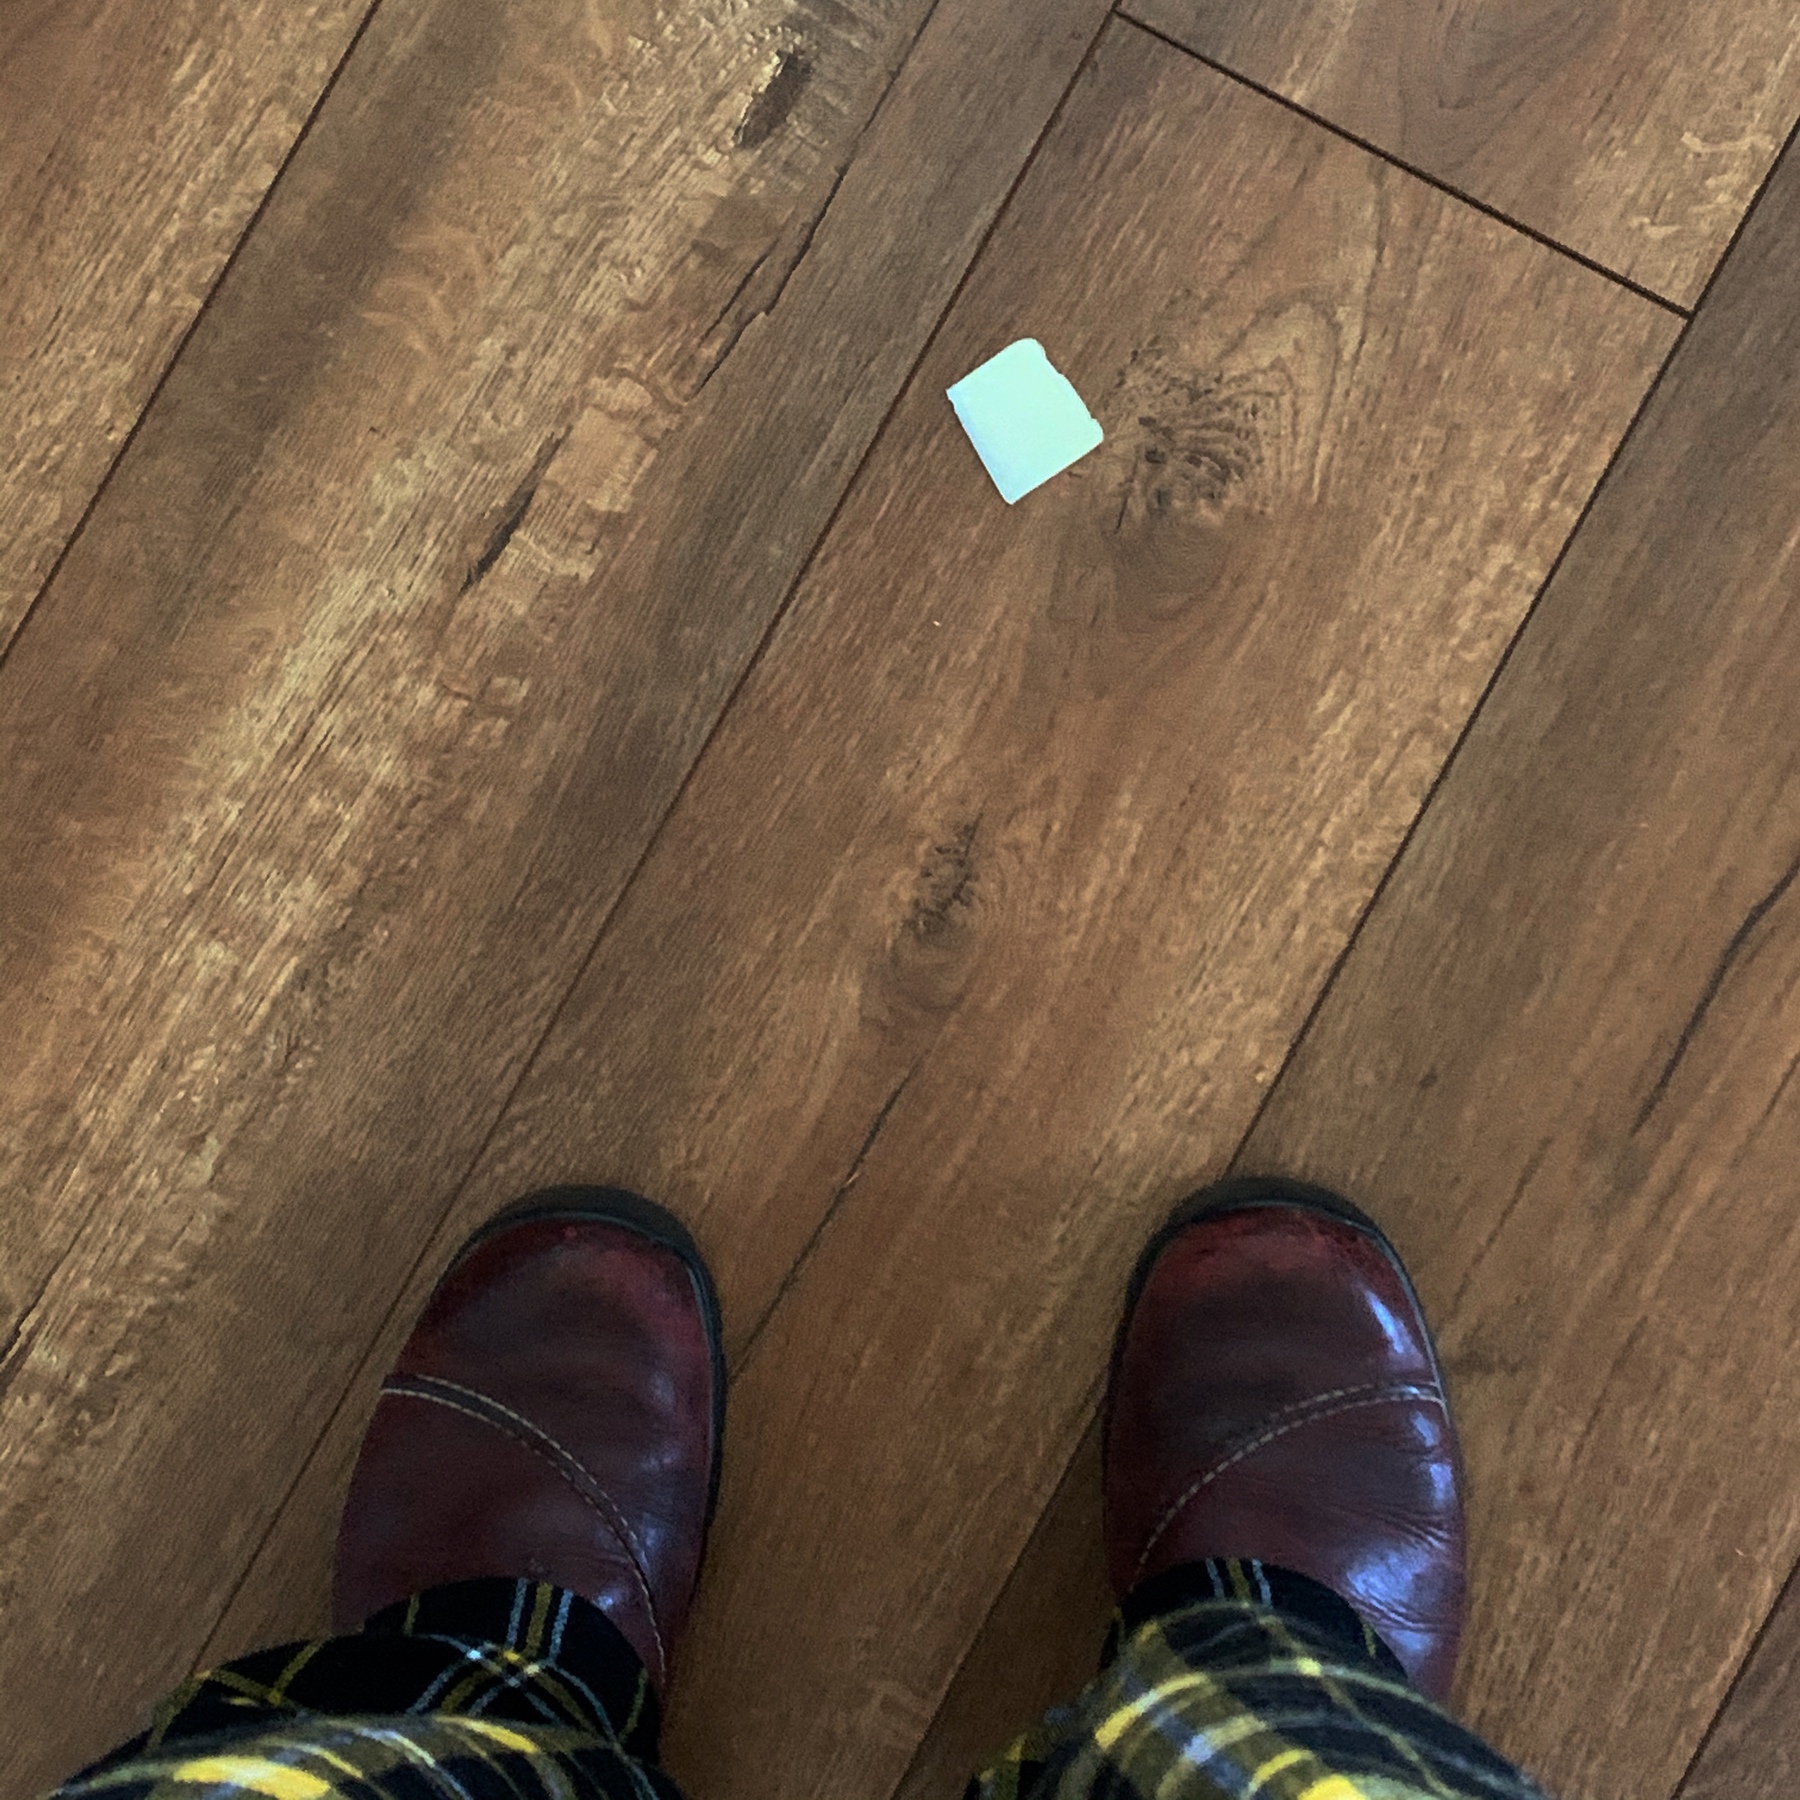 a pat of butter fell to the floor, this is my view of it